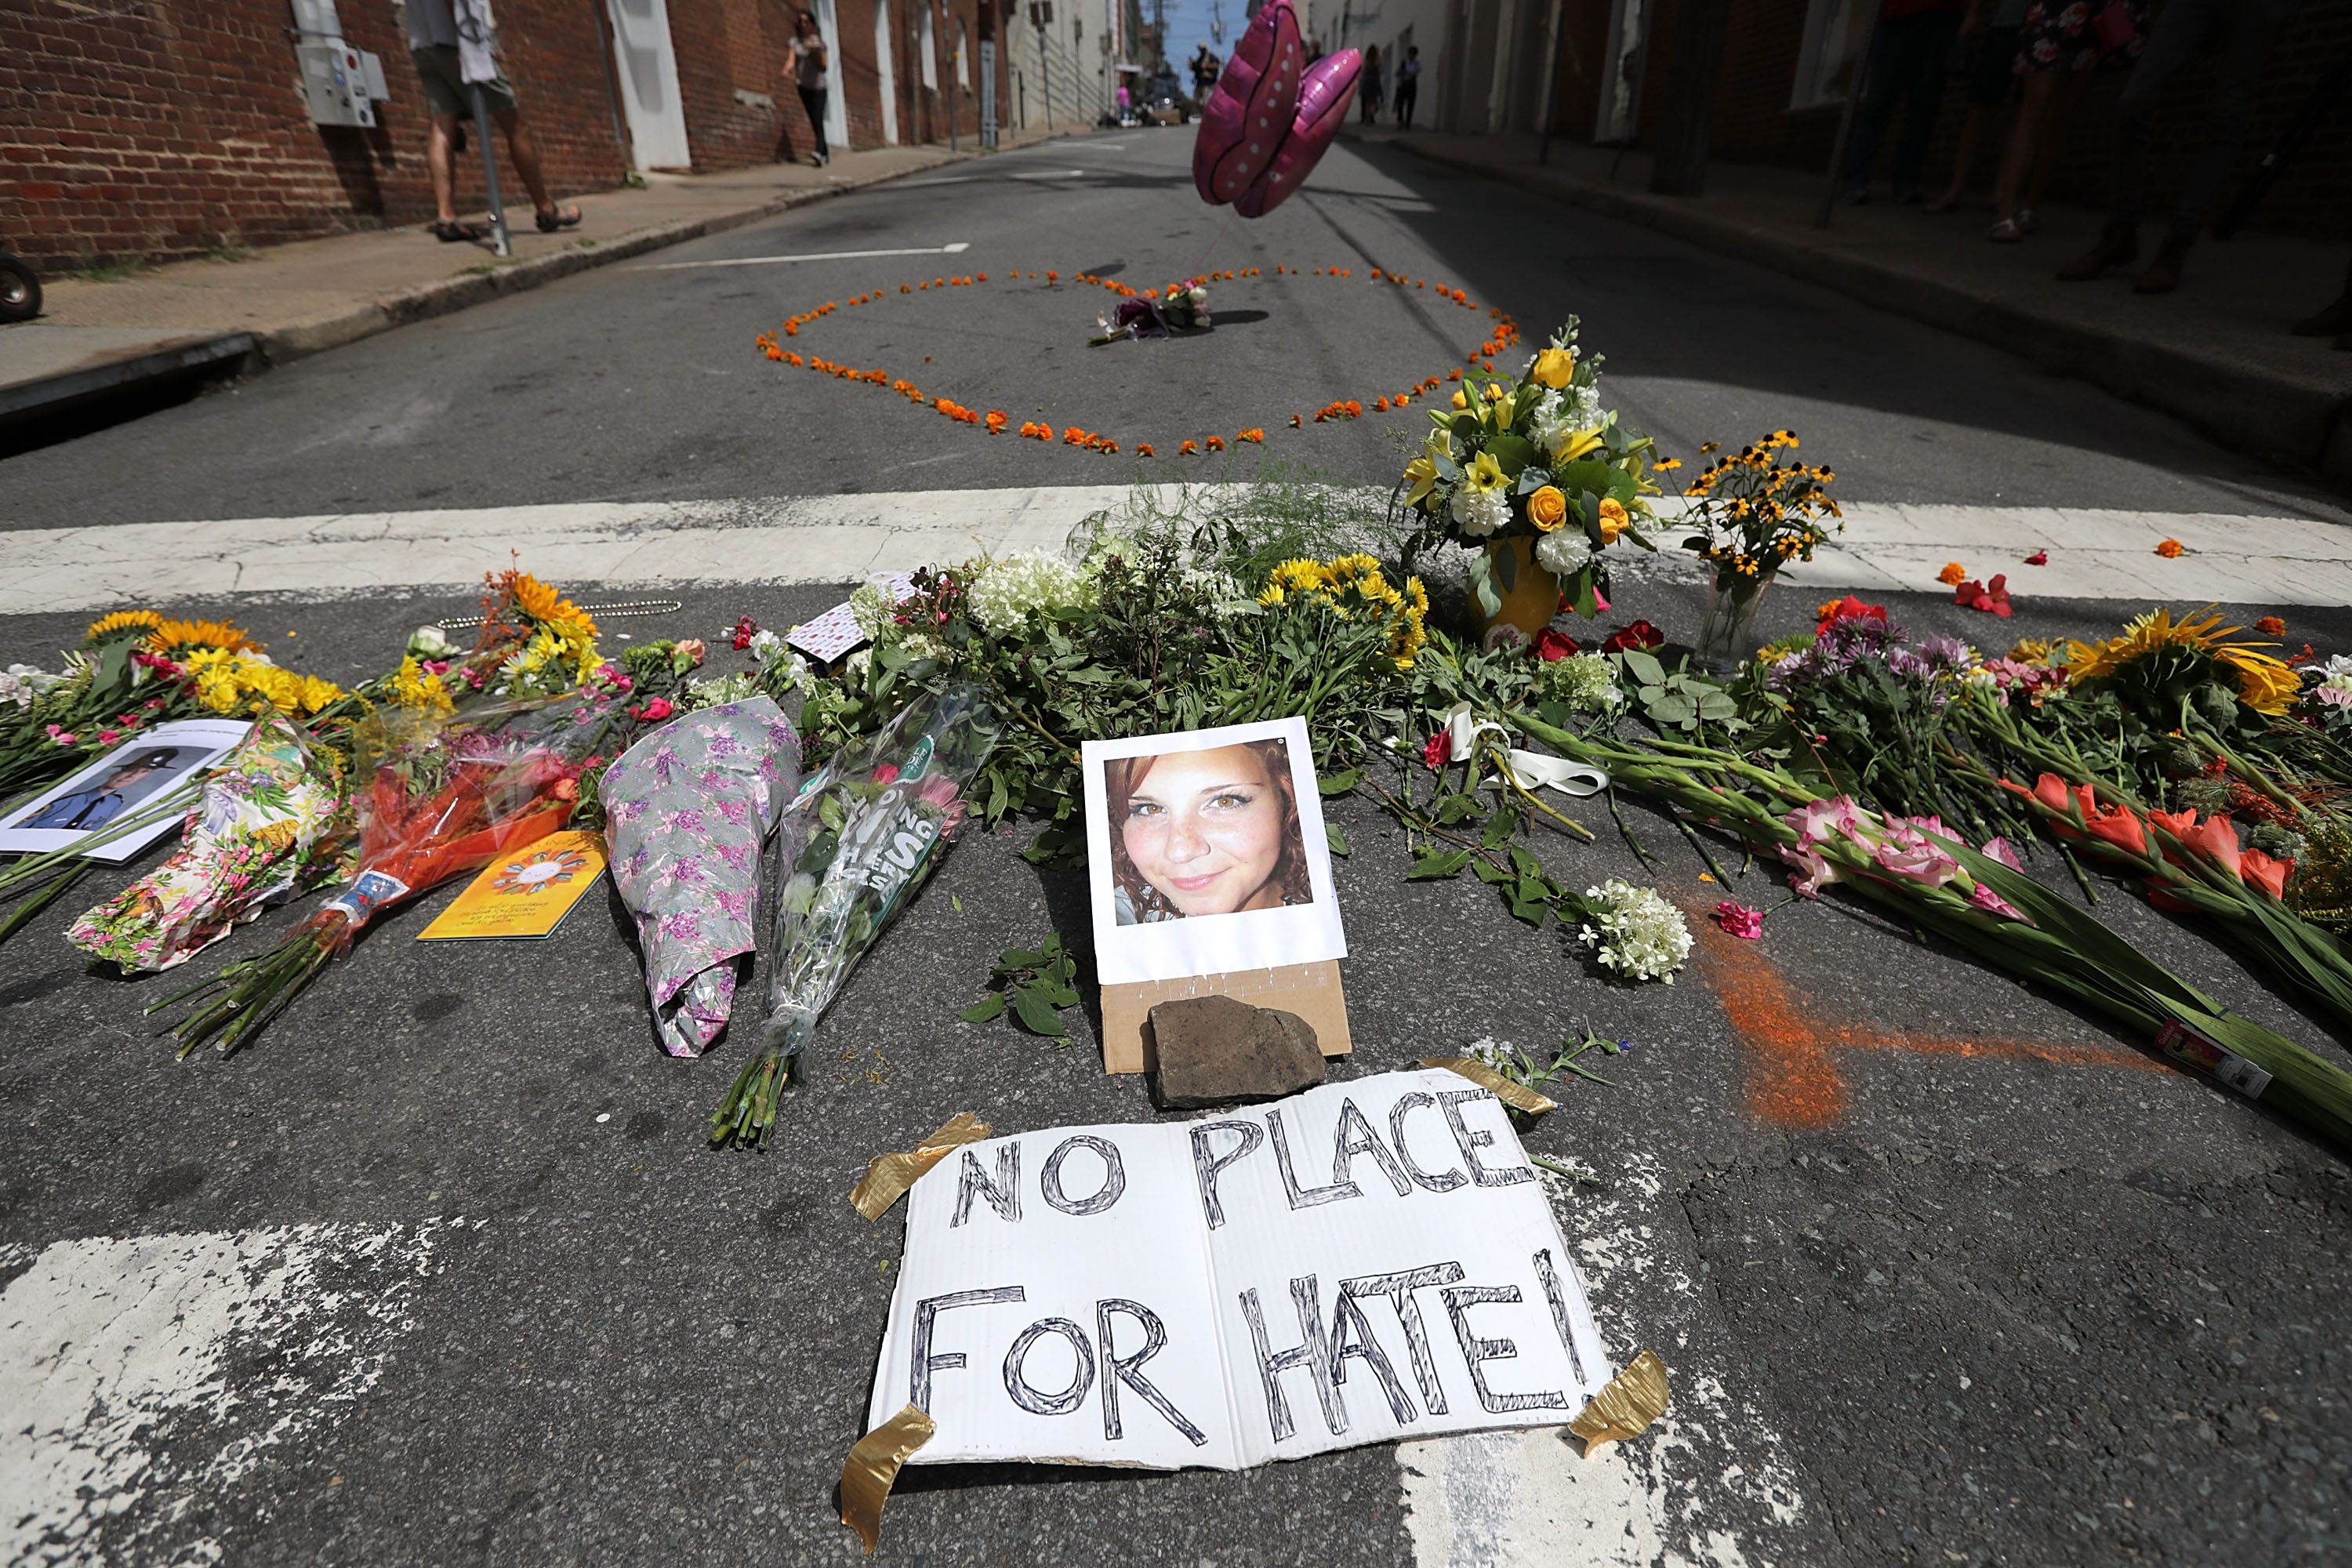 Flowers surround a photo of 32-year-old Heather Heyer, who was killed when a car plowed into a crowd of people protesting against the white supremacist Unite the Right rally, August 13, 2017 in Charlottesville, Va. (Chip Somodevilla&mdash;Getty Images)